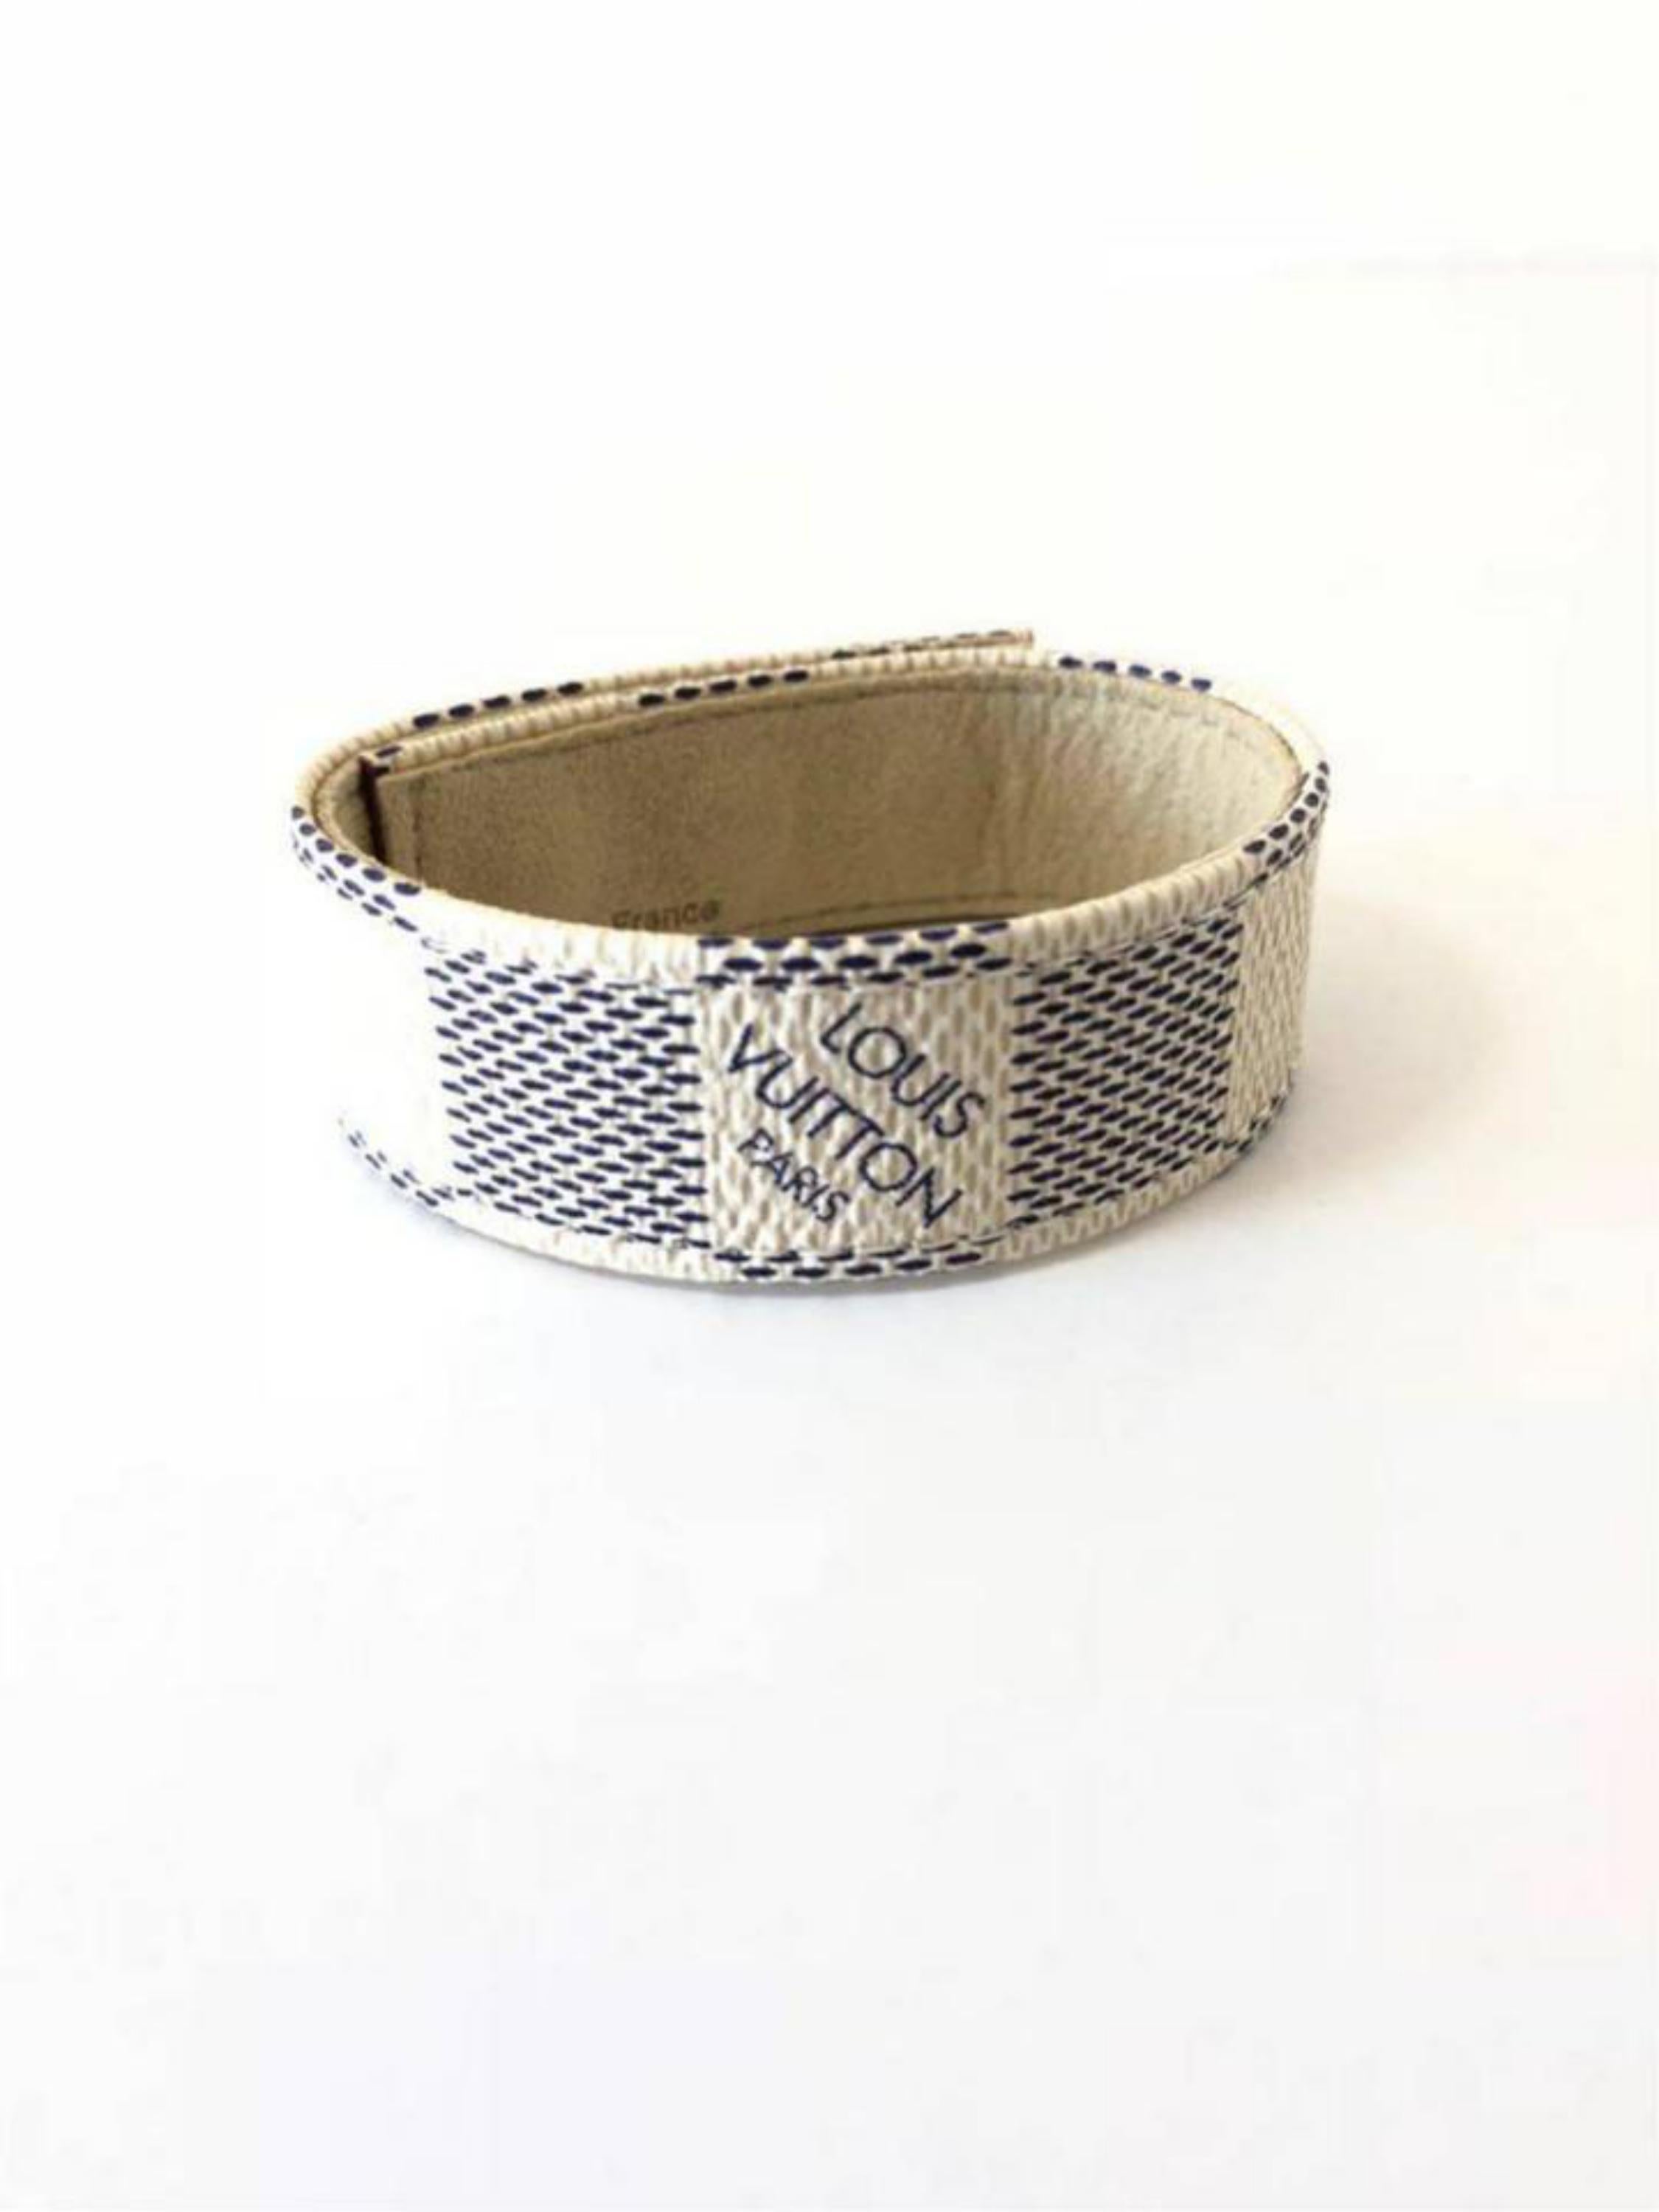 Louis Vuitton White Damier Azur Kobe 2010 Snap 232026 Bracelet In Excellent Condition For Sale In Forest Hills, NY